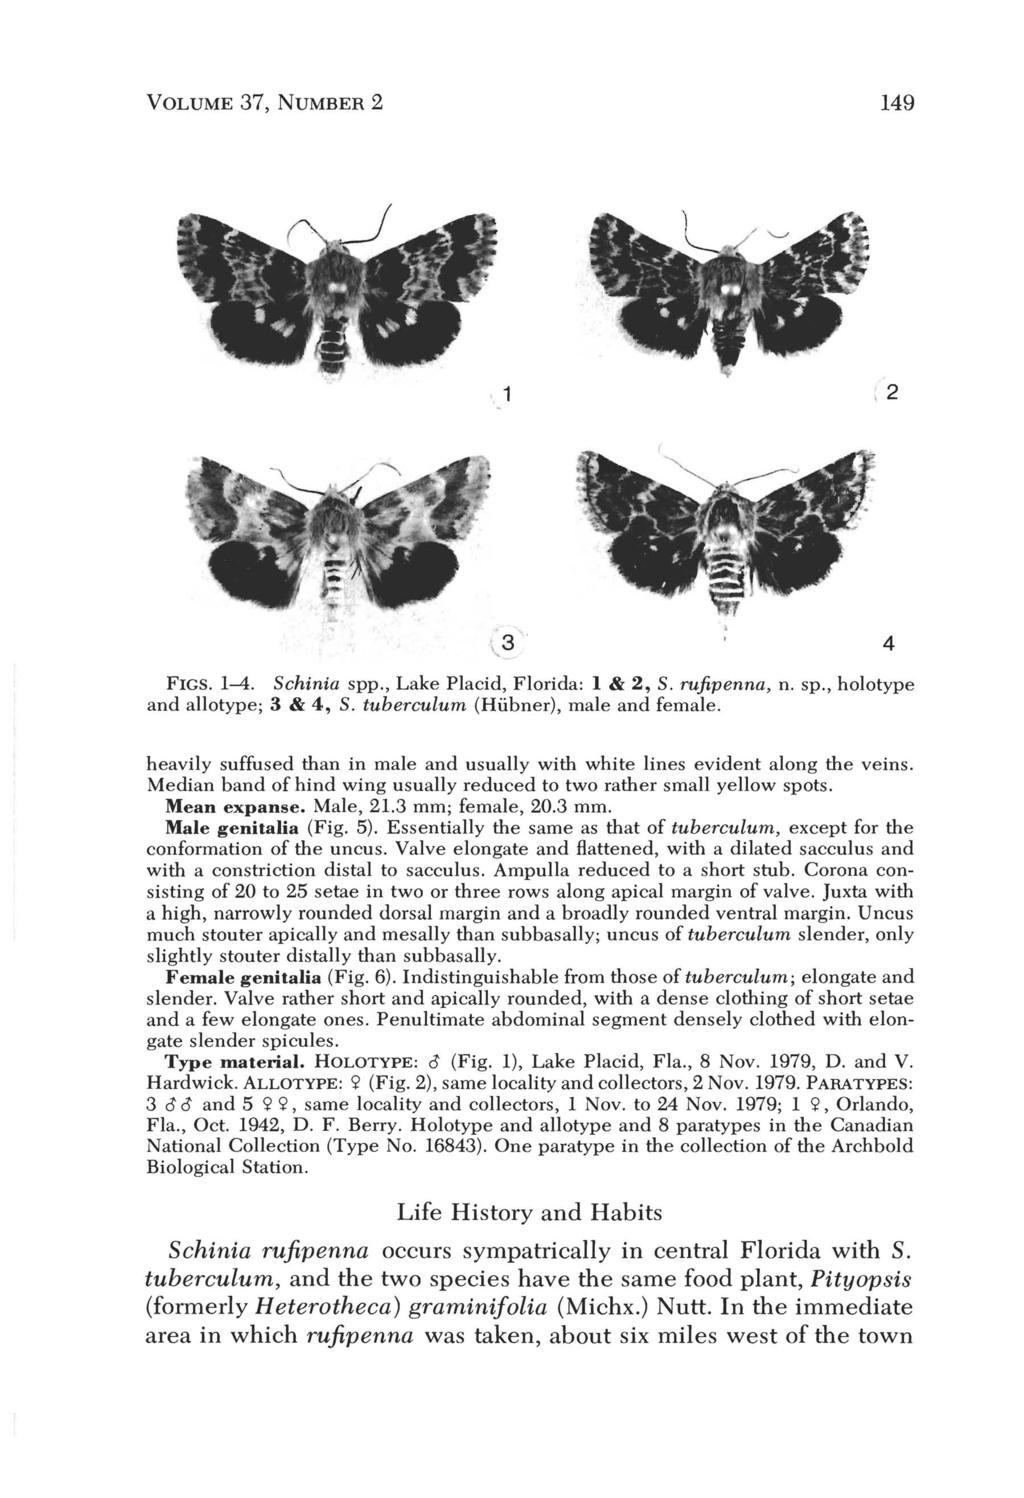 VOLUME 37, NUMBER 2 149, 2 FIGS. 1-4. Schinia spp., Lake Placid, Florida: I & 2, S. rujipenna, n. sp., holotype and allotype; 3 & 4, S. tuberculum (Hubner), male and female.